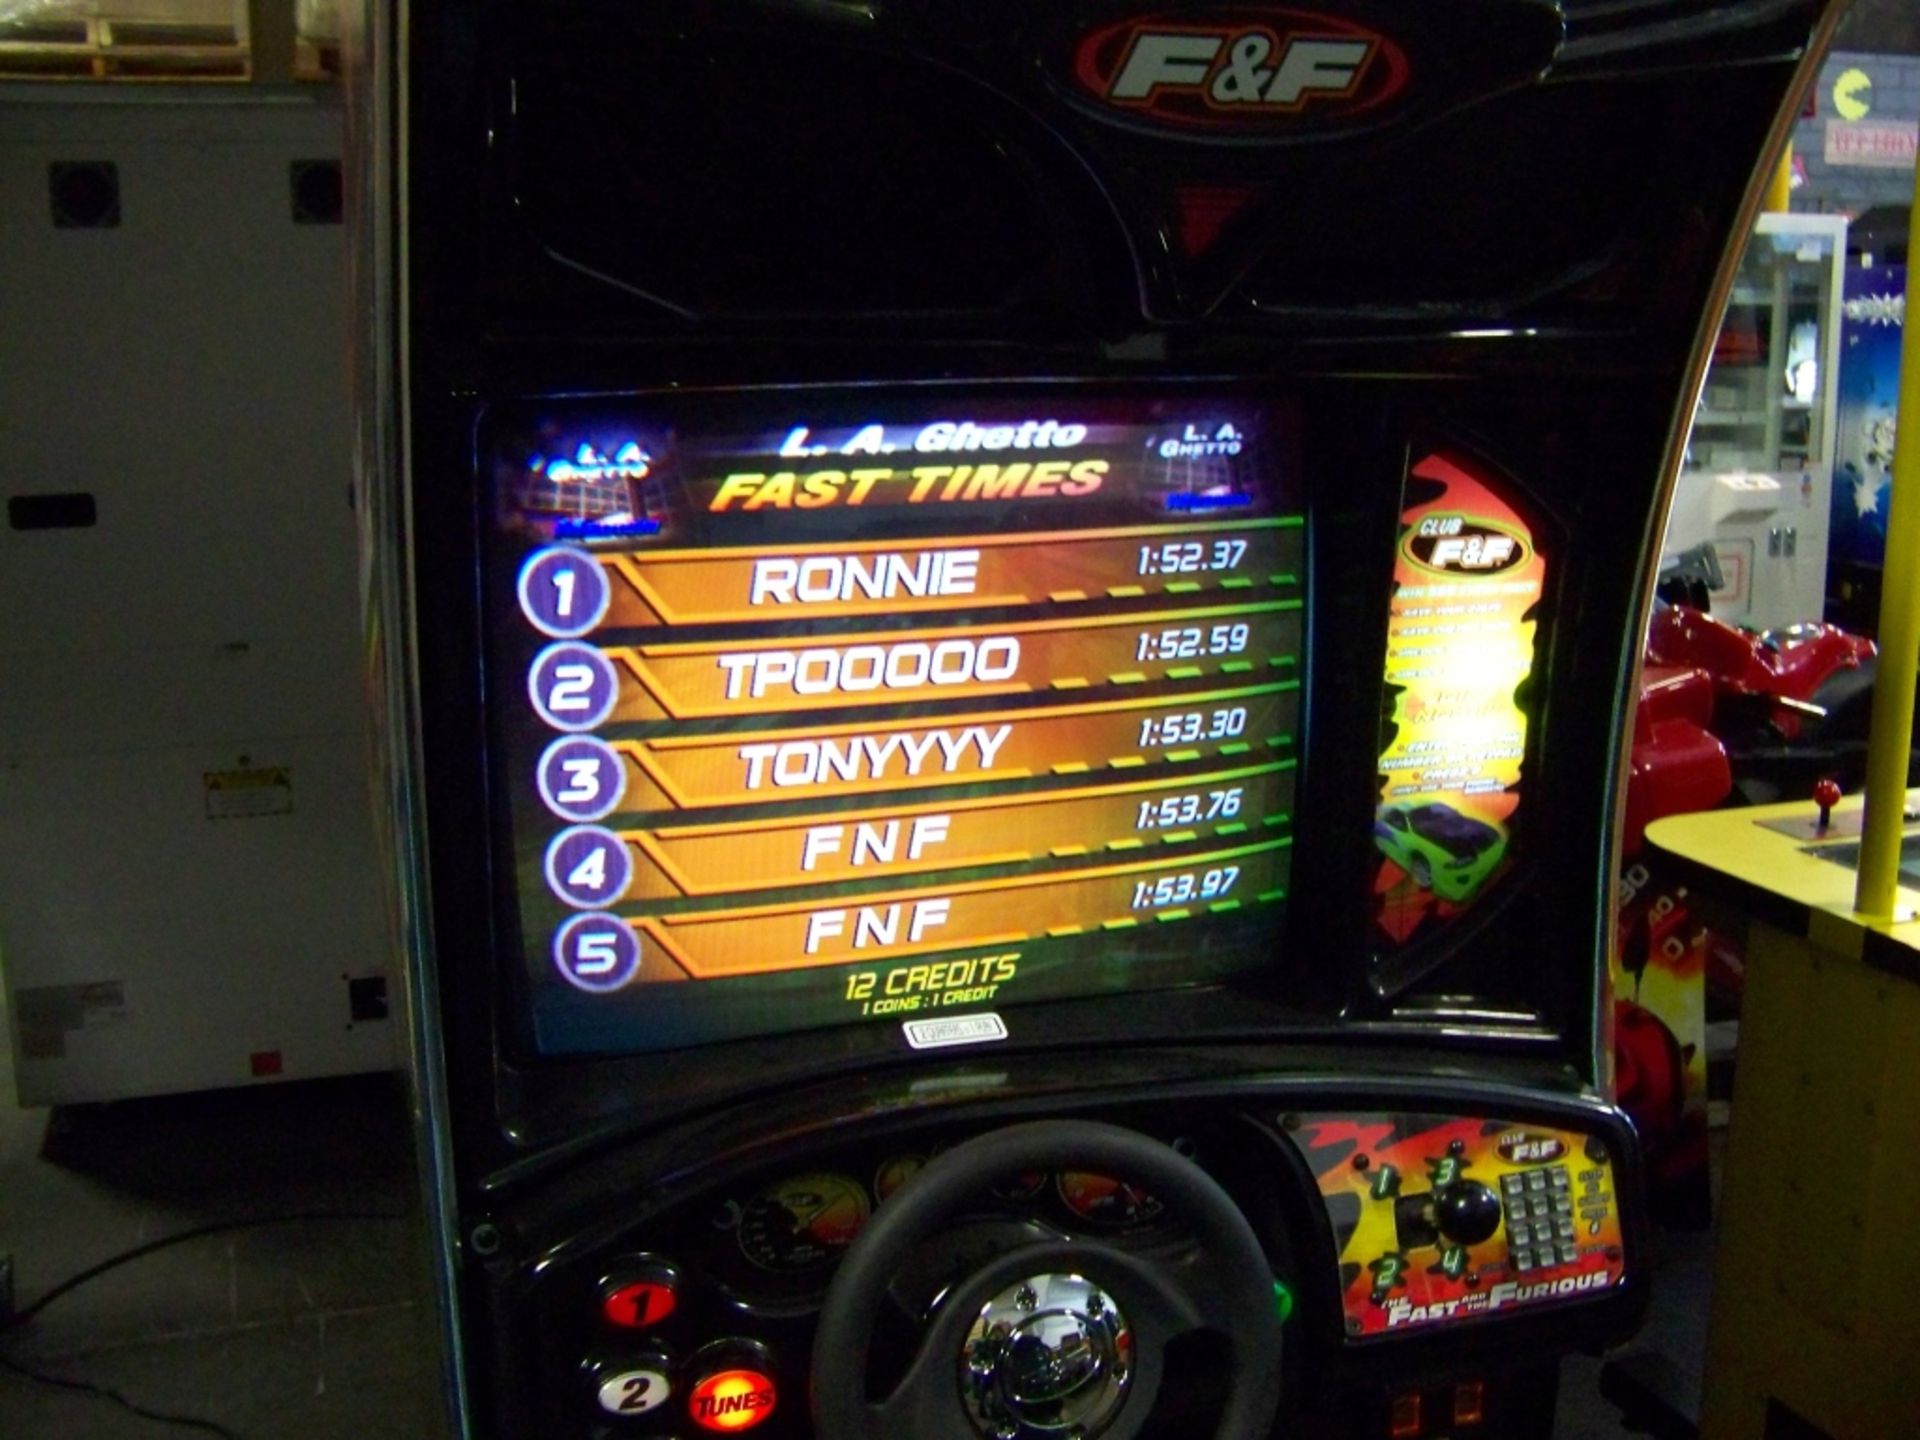 FAST AND FURIOUS RACING DRIVER ARCADE GAME Item is in used condition. Evidence of wear and - Image 5 of 10